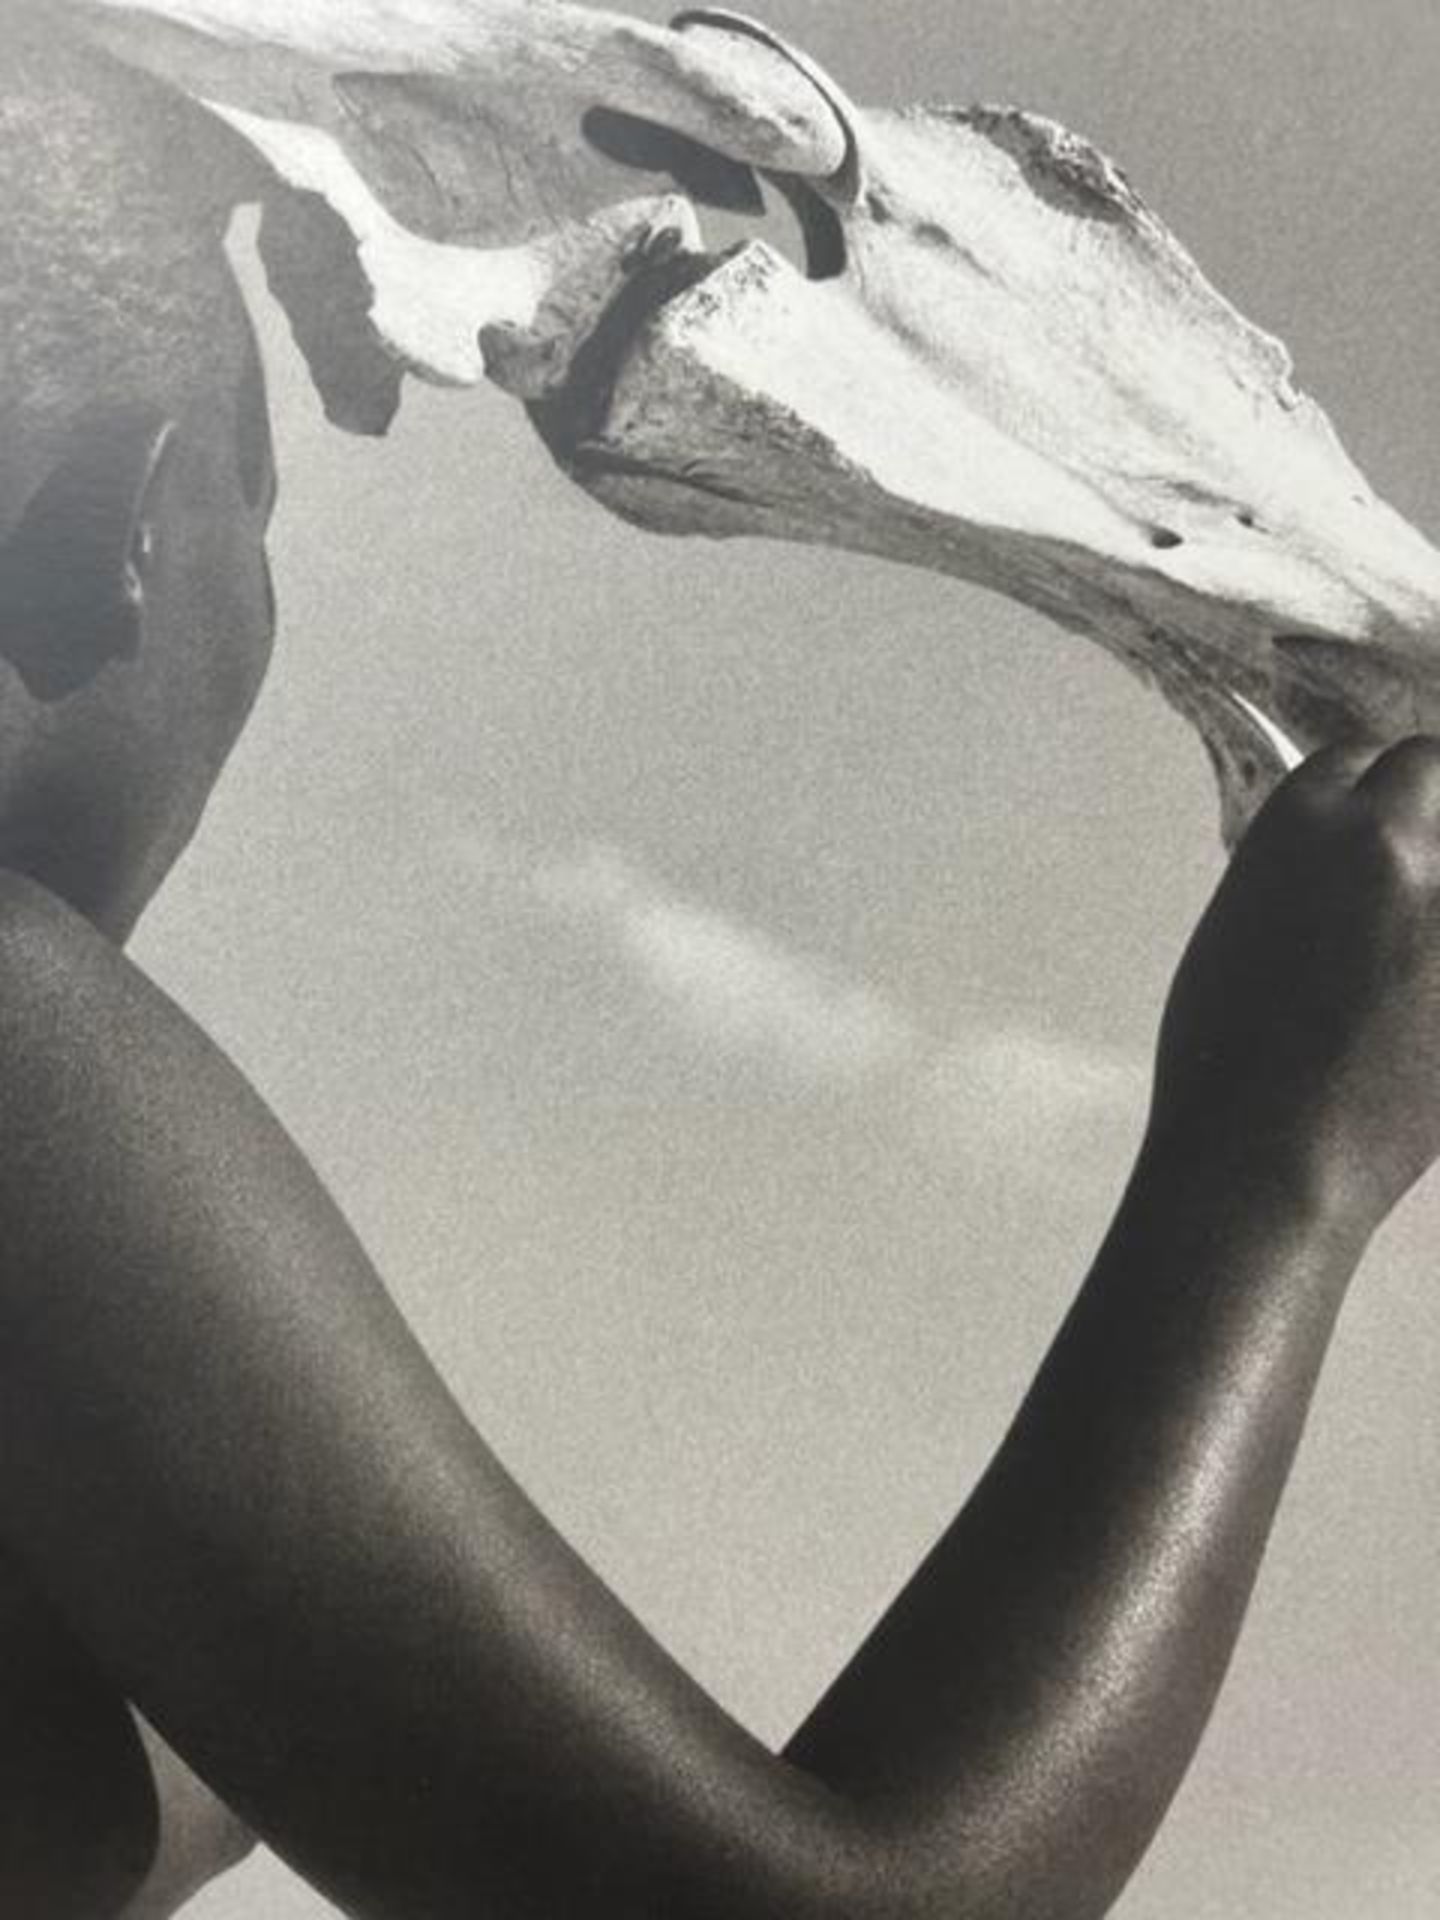 Herb Ritts "Untitled" Print. - Image 6 of 6